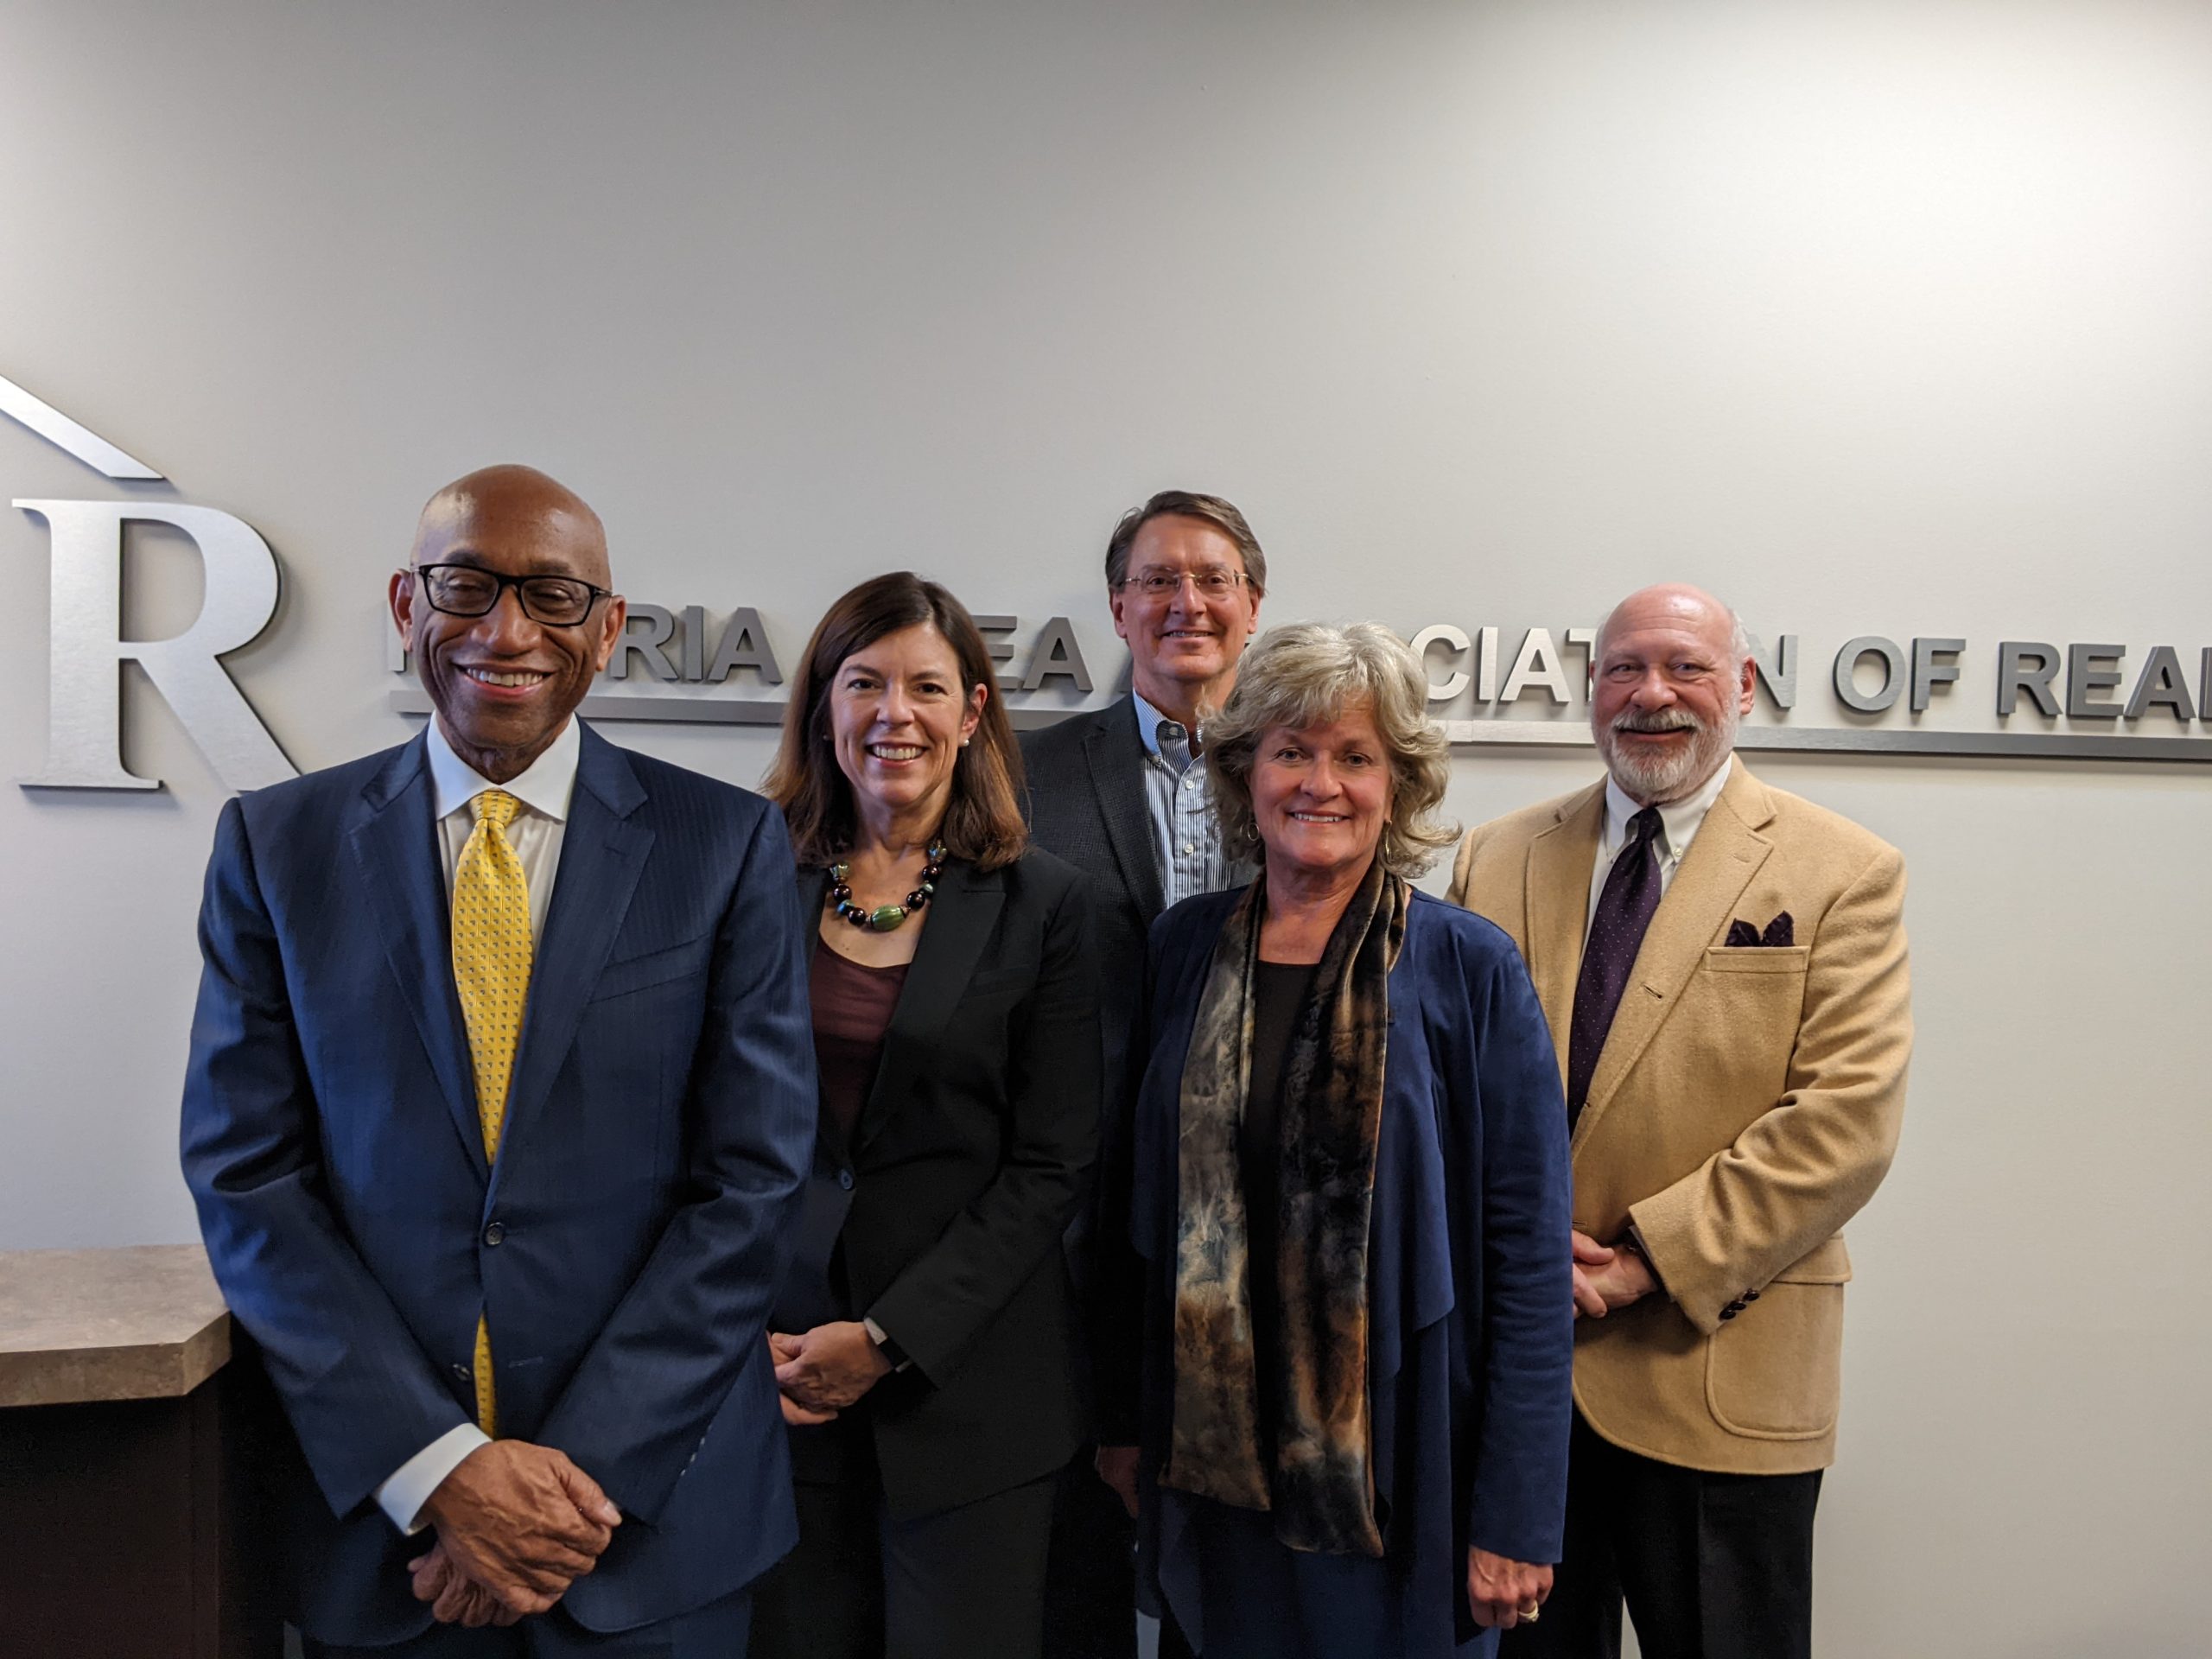 The team was led by Wendy Timm, CRE, Dillon, CO & St. Louis, MO. Panelists were Beth Beckett, CRE, Paoli, PA; Randal Dawson, CRE, Chicago, IL; Matt Rueff, CRE, Indianapolis, IN; A. Lloyd Thomas, CRE, Temple, TX.